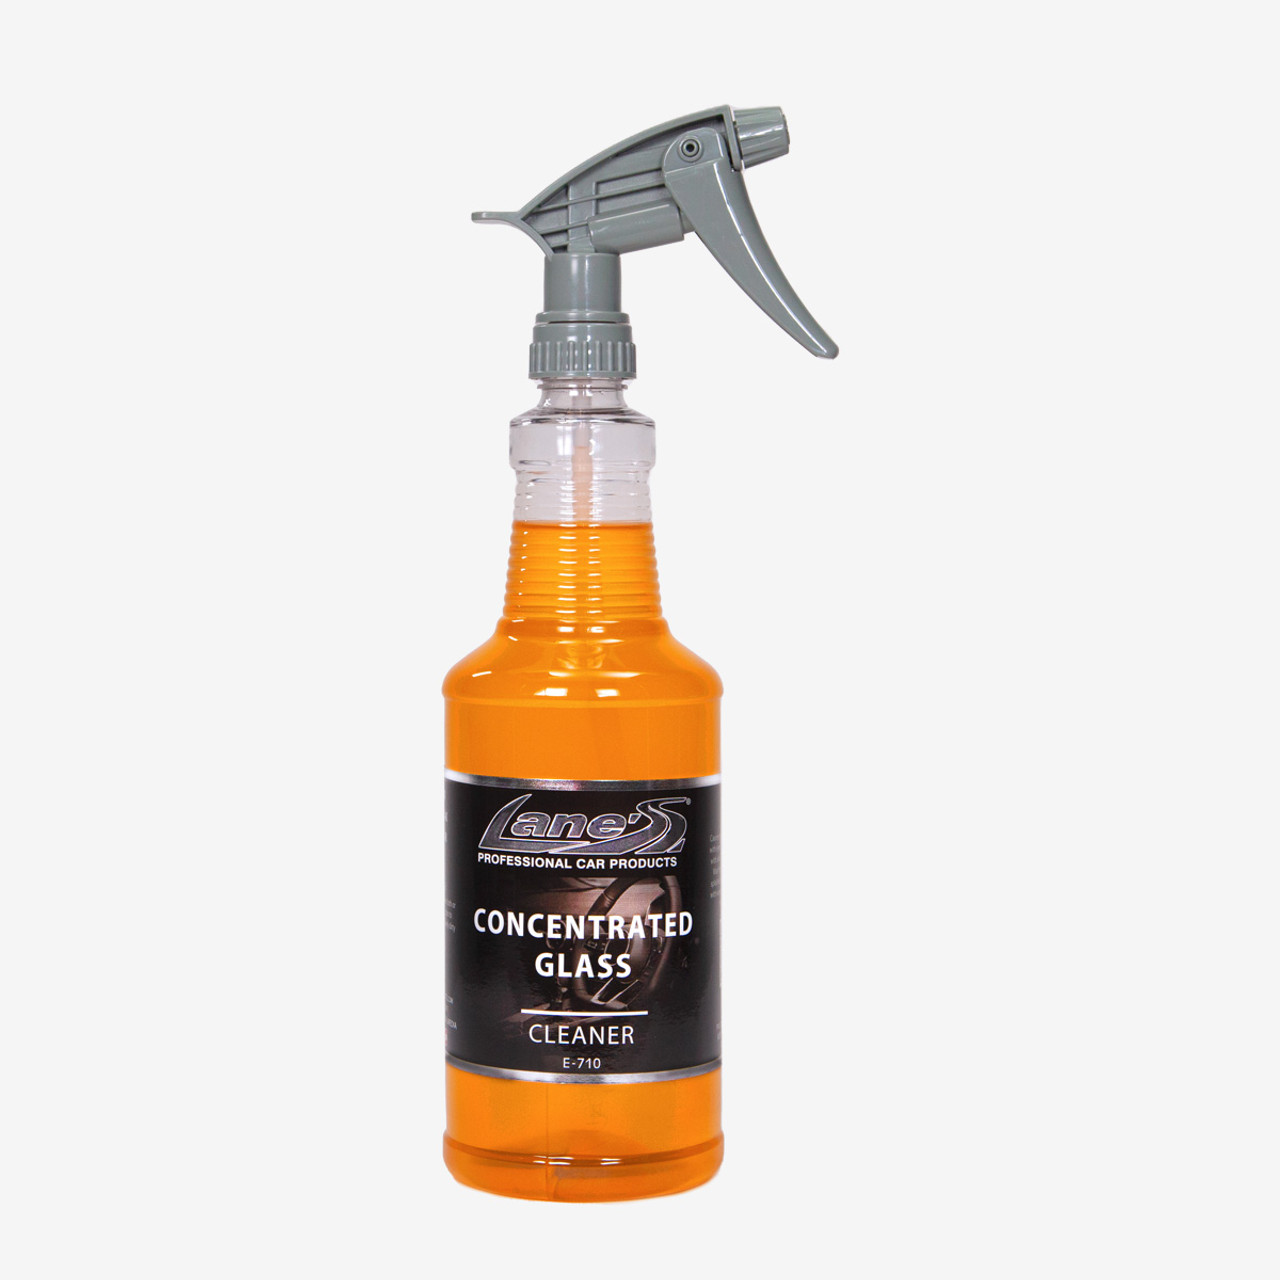 Concentrated Auto Glass Cleaner - Best Glass Cleaner for Auto Detailing